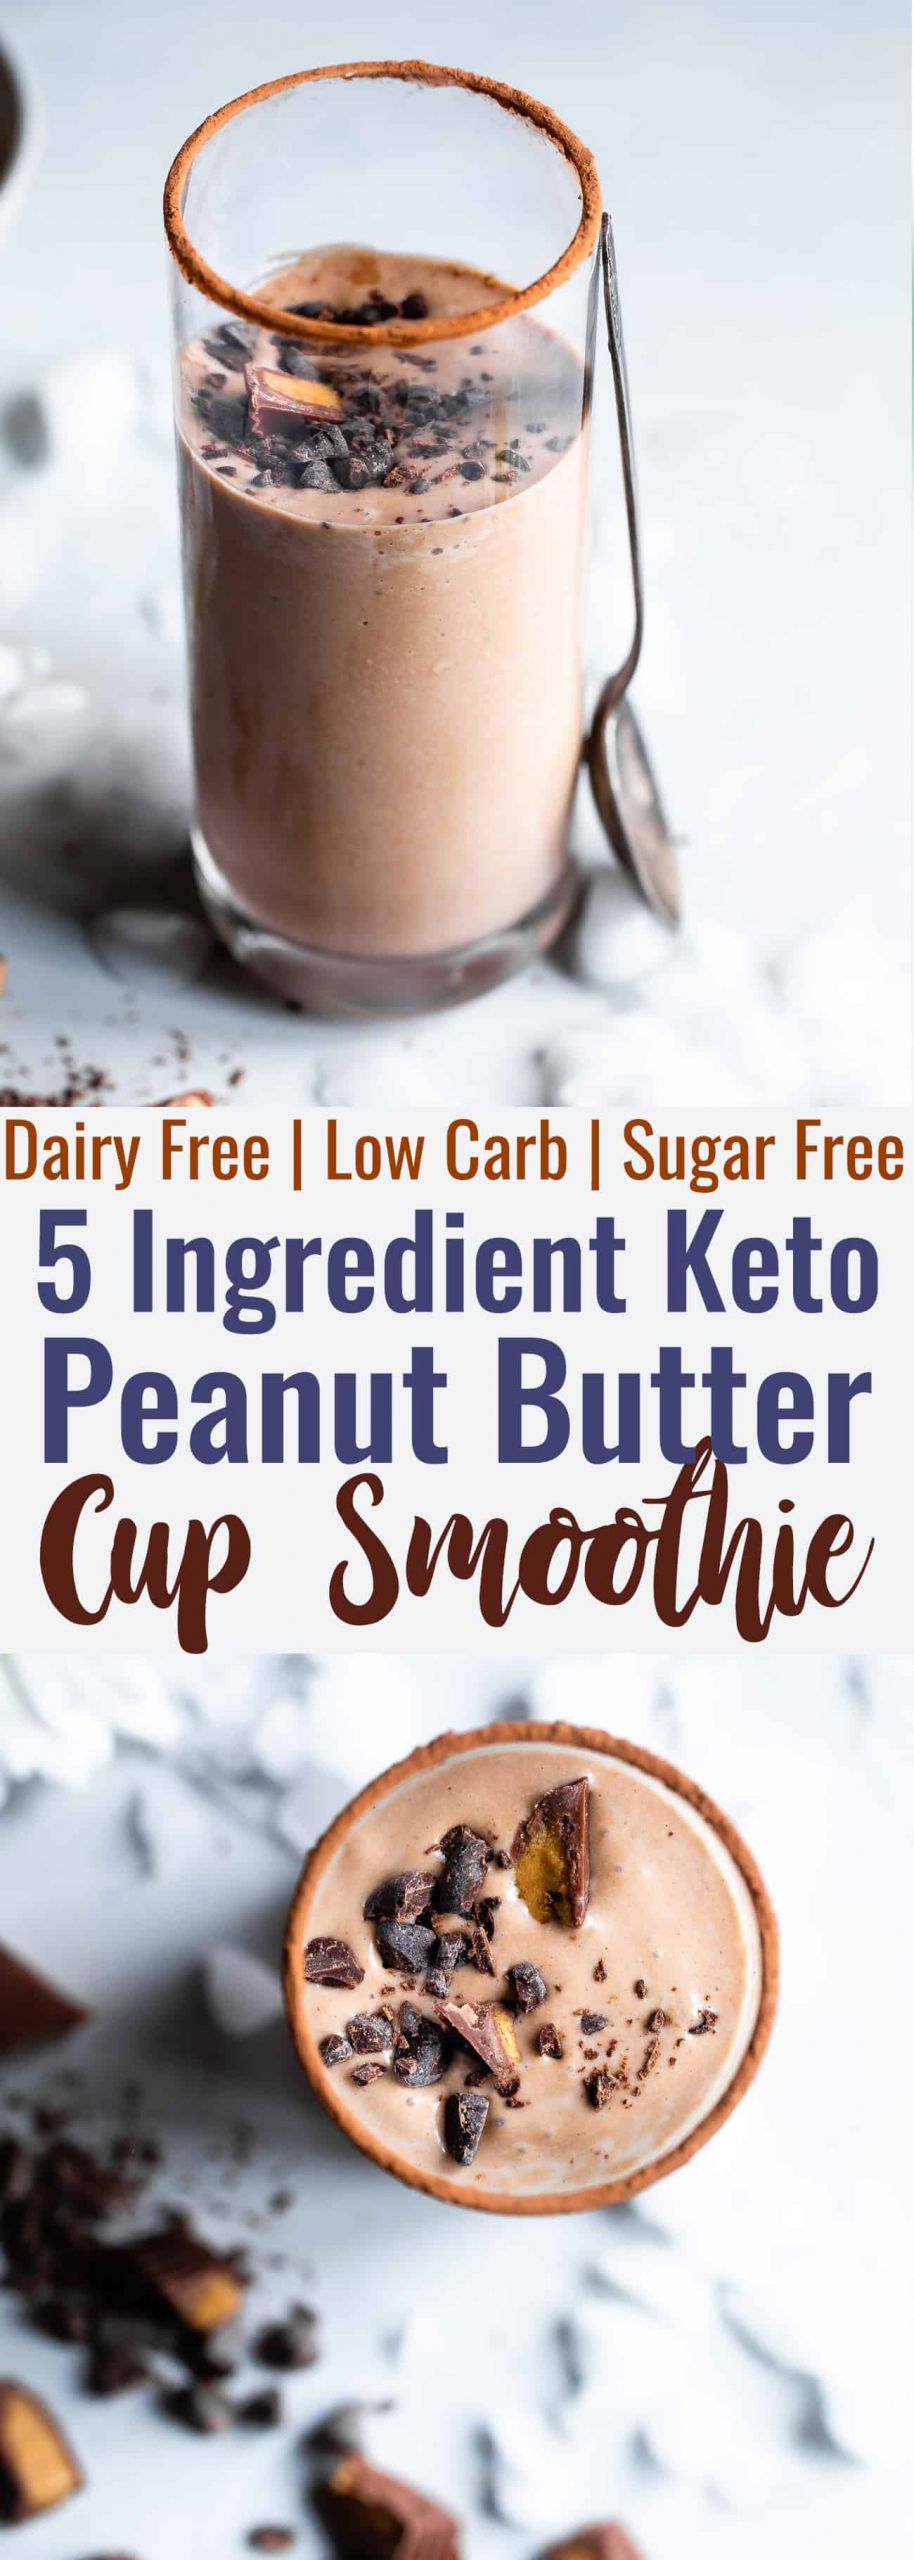 Low Carb Keto Smoothies
 Peanut Butter Keto Low Carb Smoothie With Almond Milk